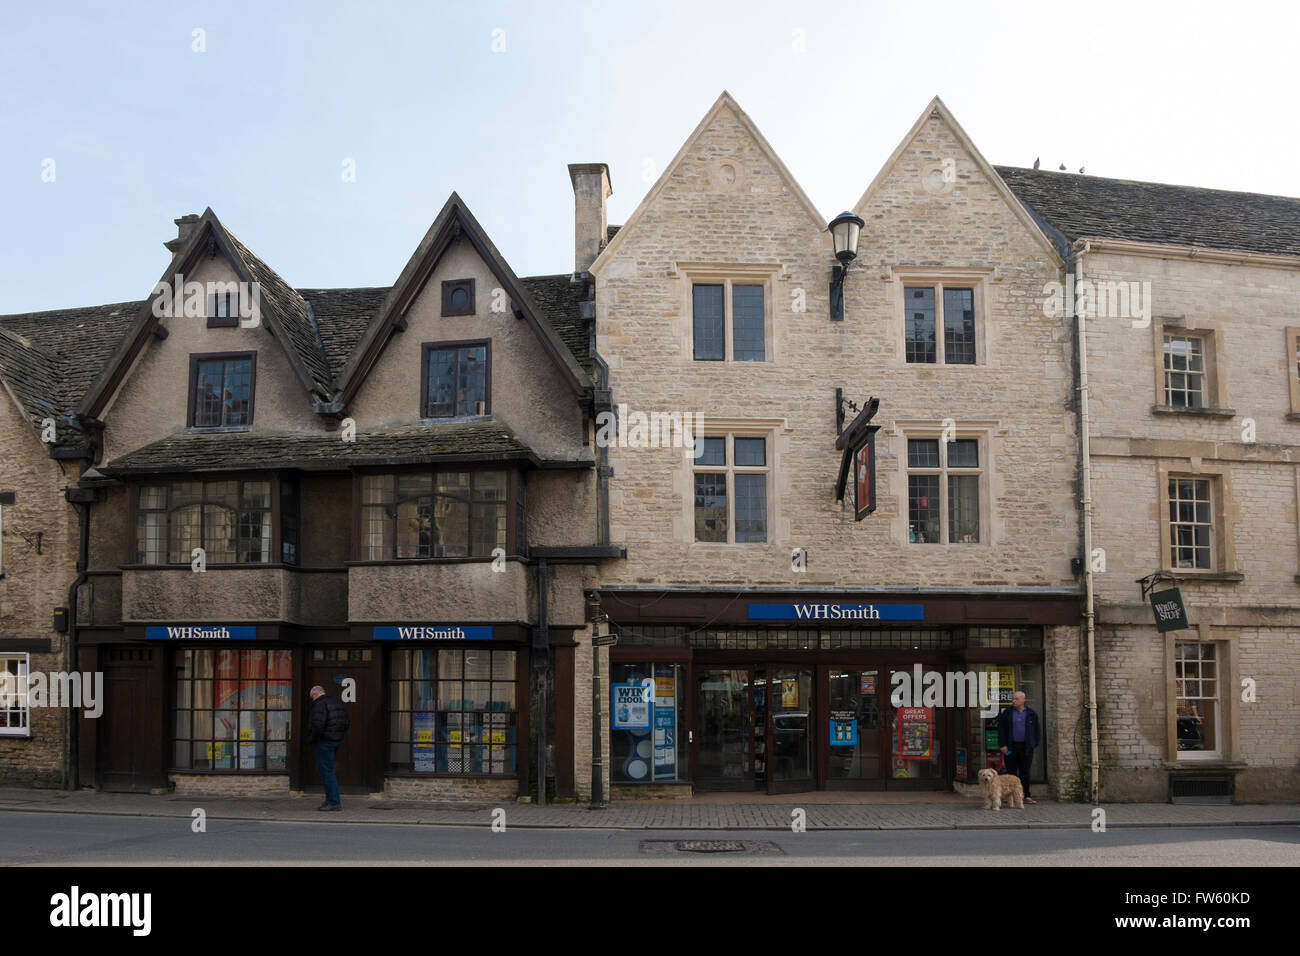 WH Smith stationery, book and magazine shop in Castle Street, Cirencester, Gloucestershire, UK Stock Photo